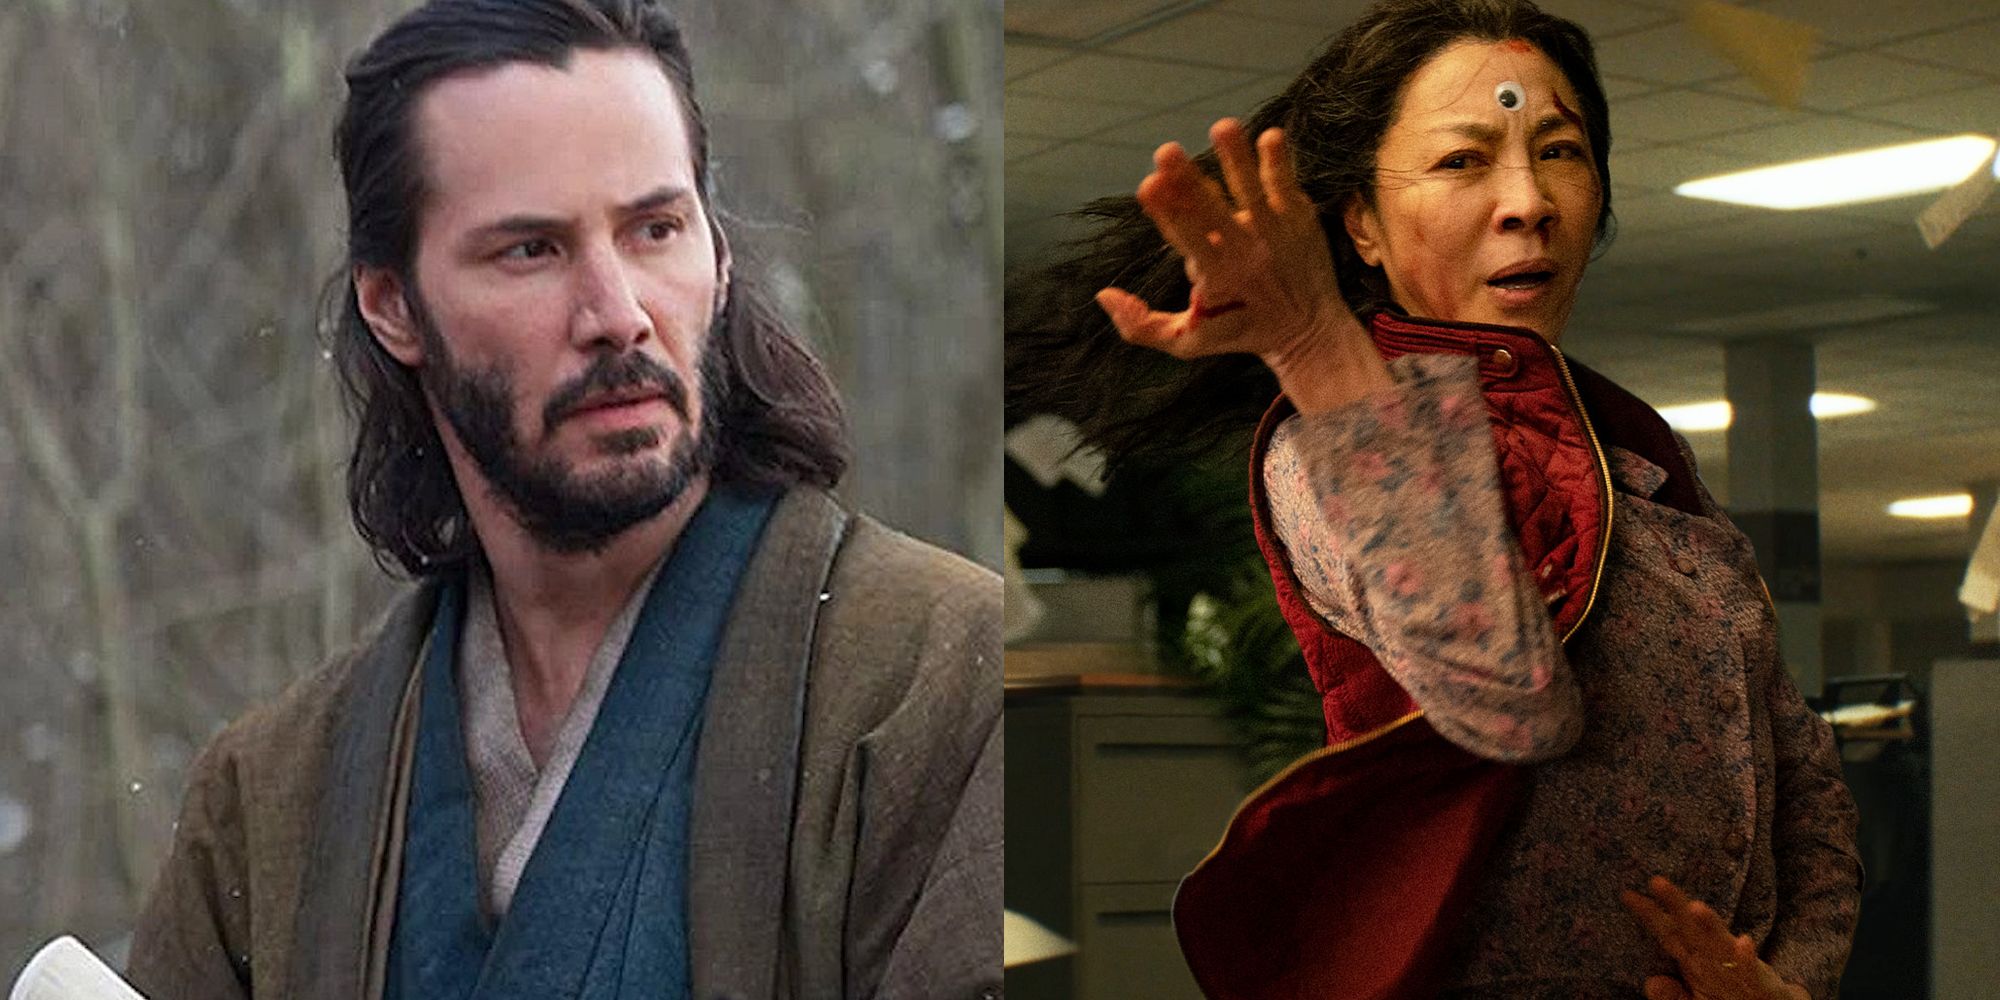 10 Highest Grossing Martial Arts Movies of the Last 10 Years